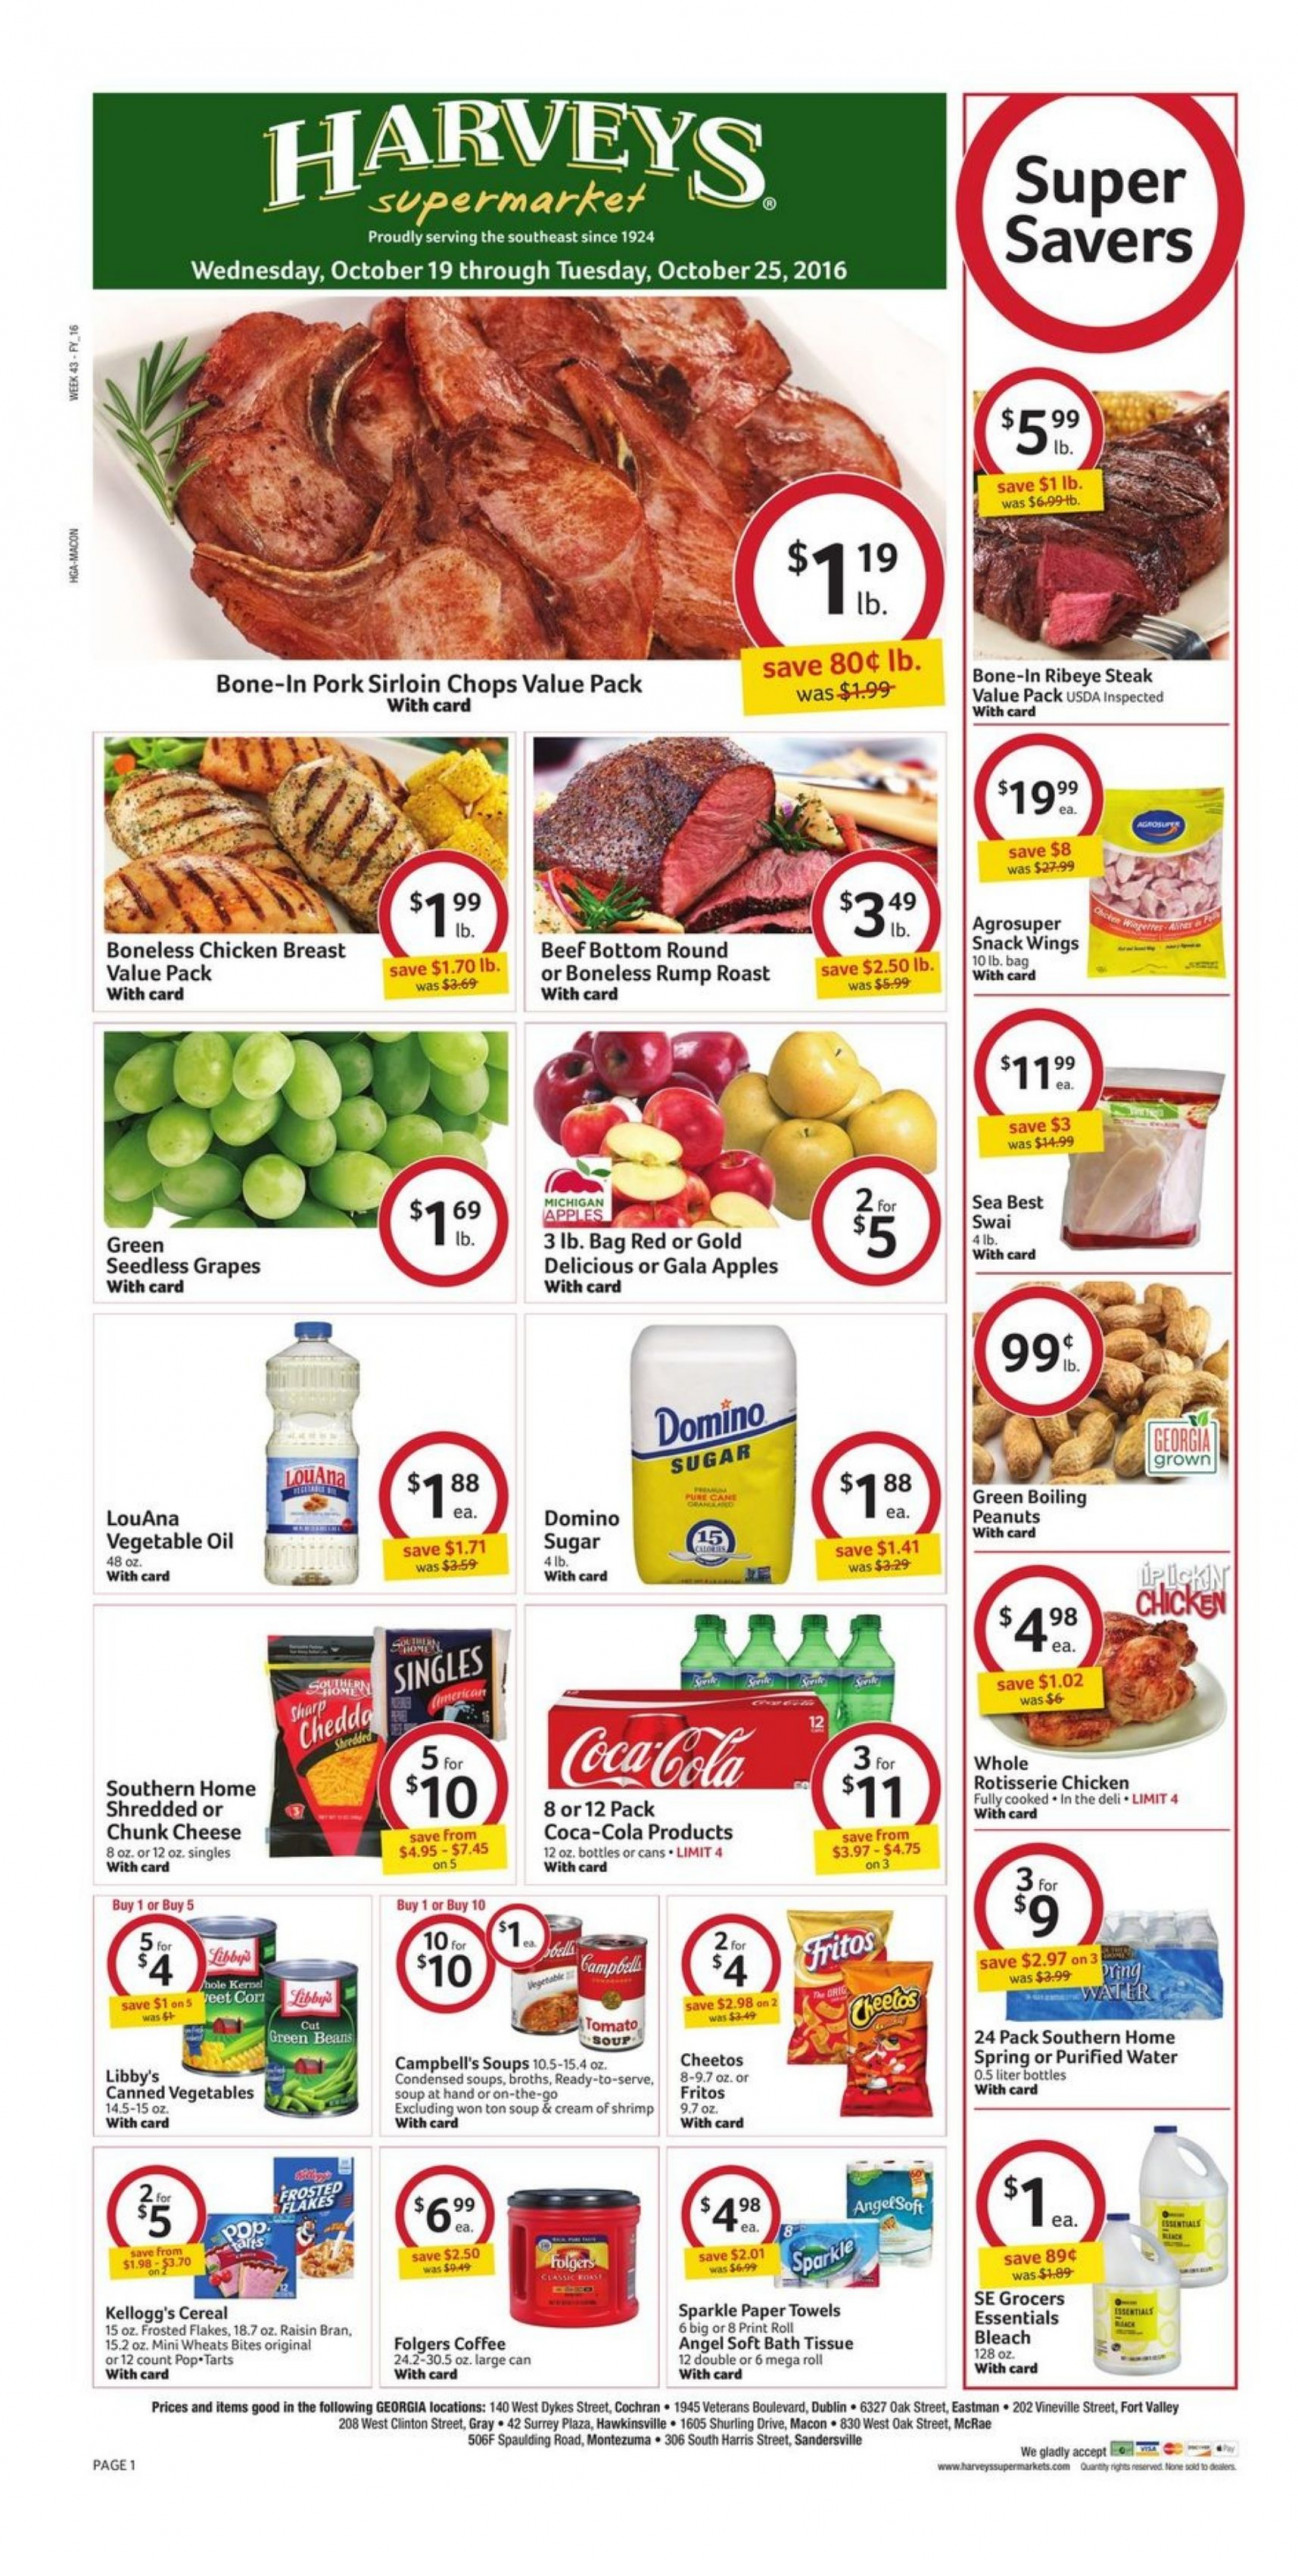 Printable Weekly Grocery Ads The Power Of Advertisement